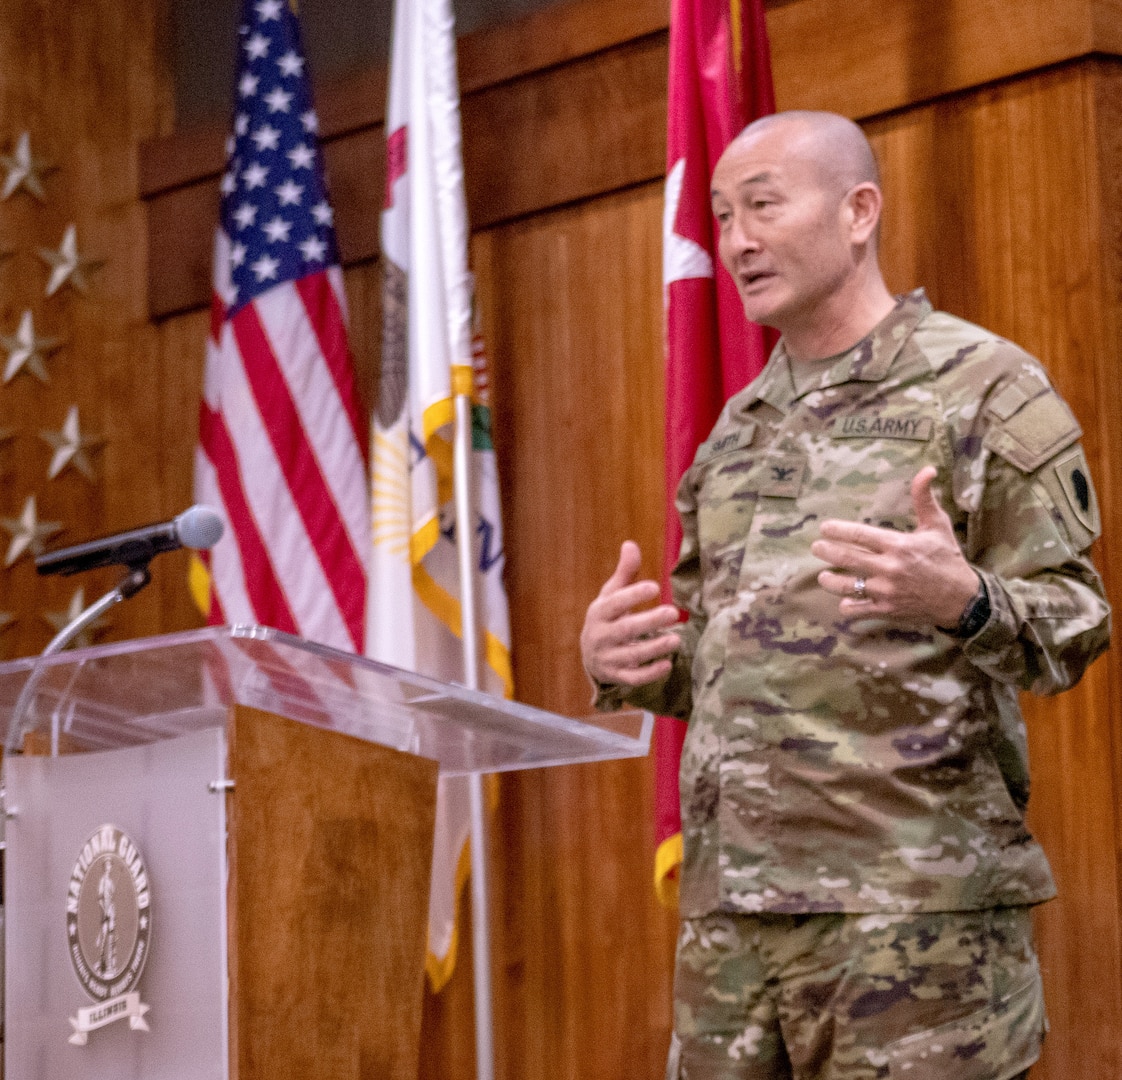 Newly promoted Col. Eric Smith, Director of Logistics for the Illinois Army National Guard, thanks family and friends for their support throughout his 34 years of service during a promotion ceremony Jan. 13 at Camp Lincoln, Springfield.